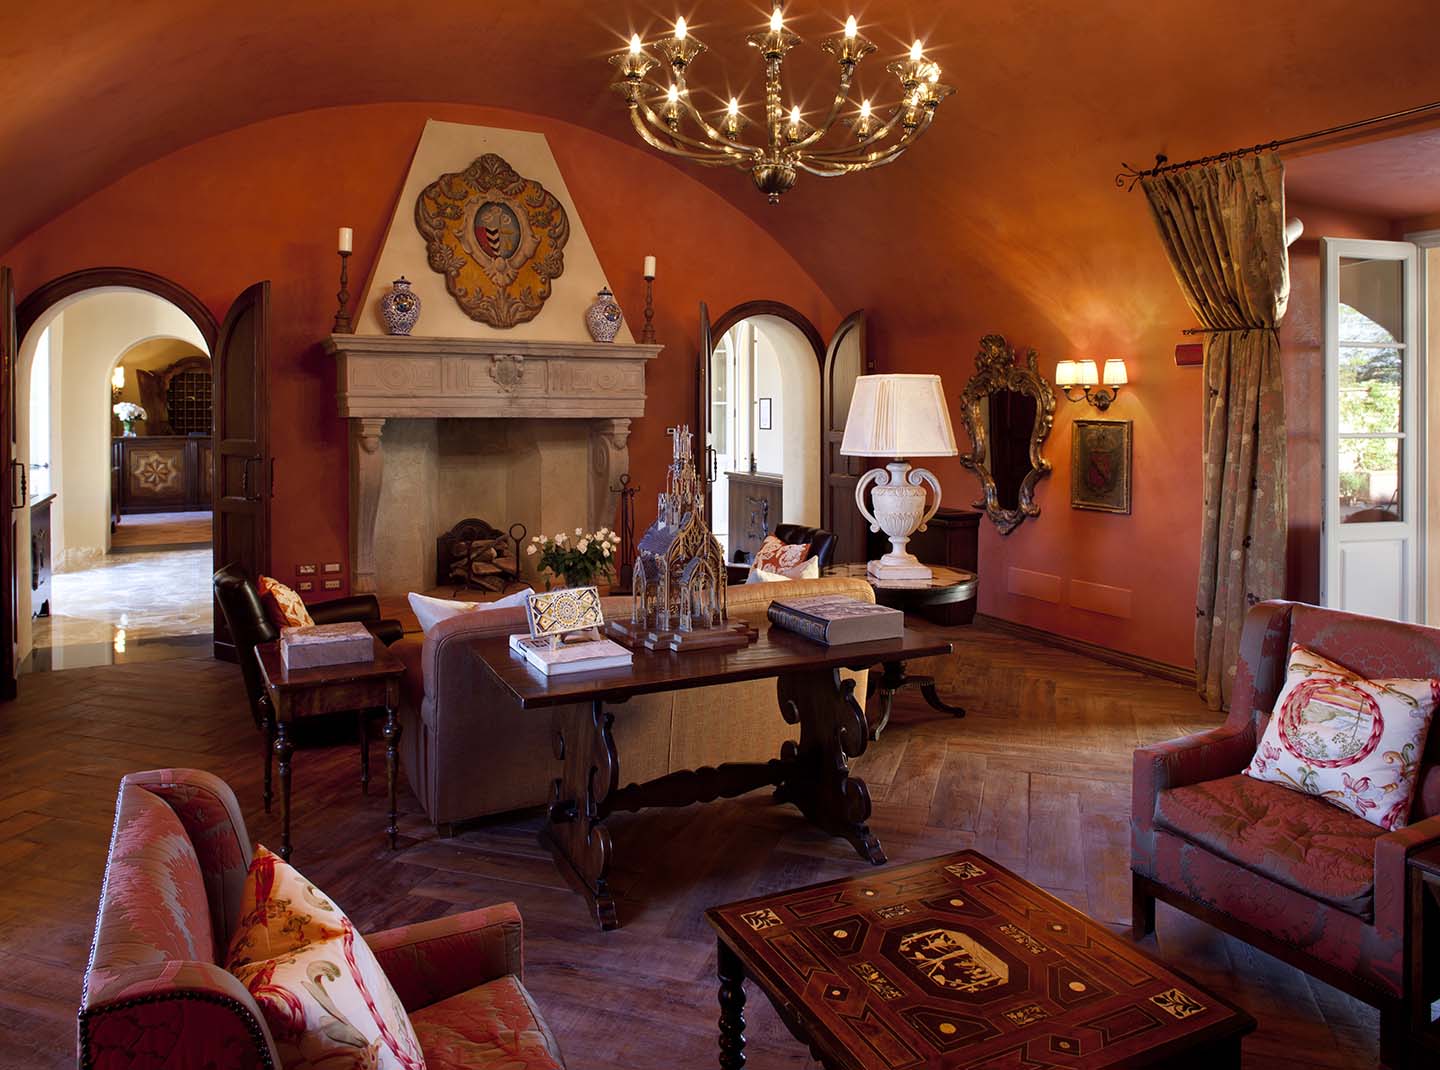 castello di casole lobby with a grandly scaled fireplace and sienna hues